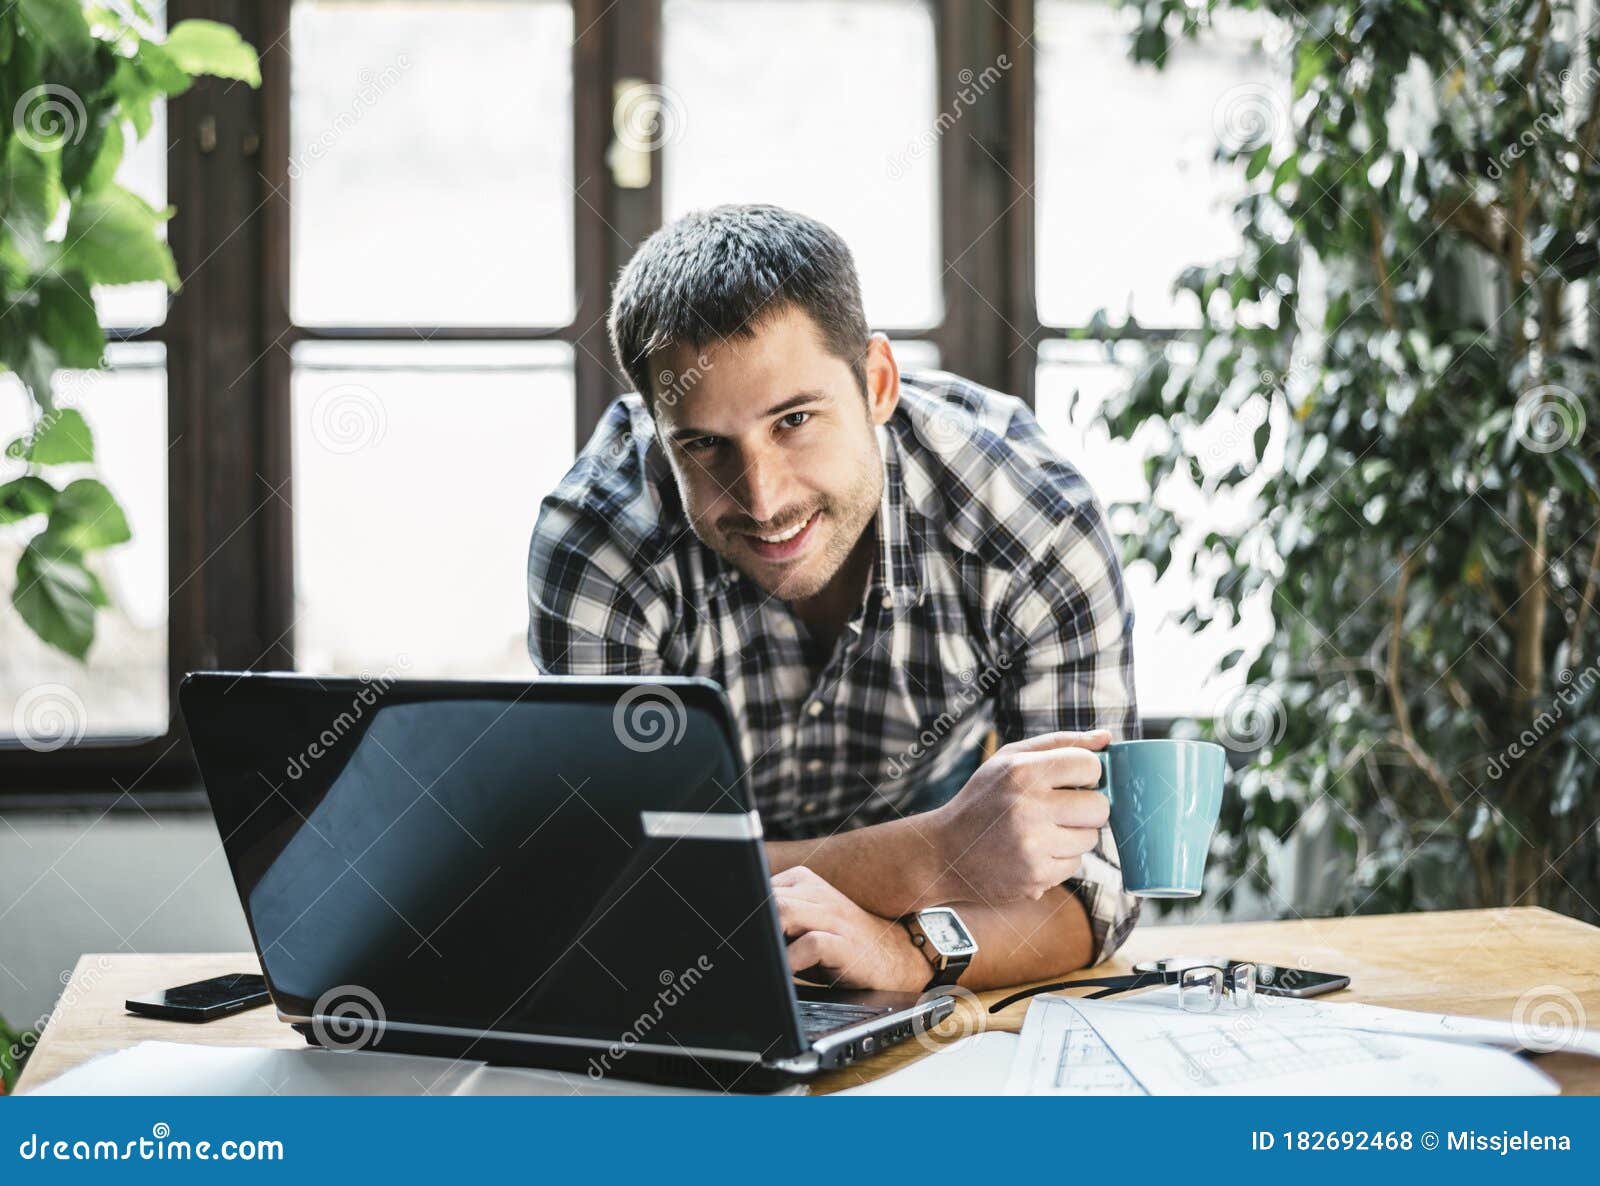 young man work remote in his cool home office. modern workspace studio for online business and freelance creative digital project